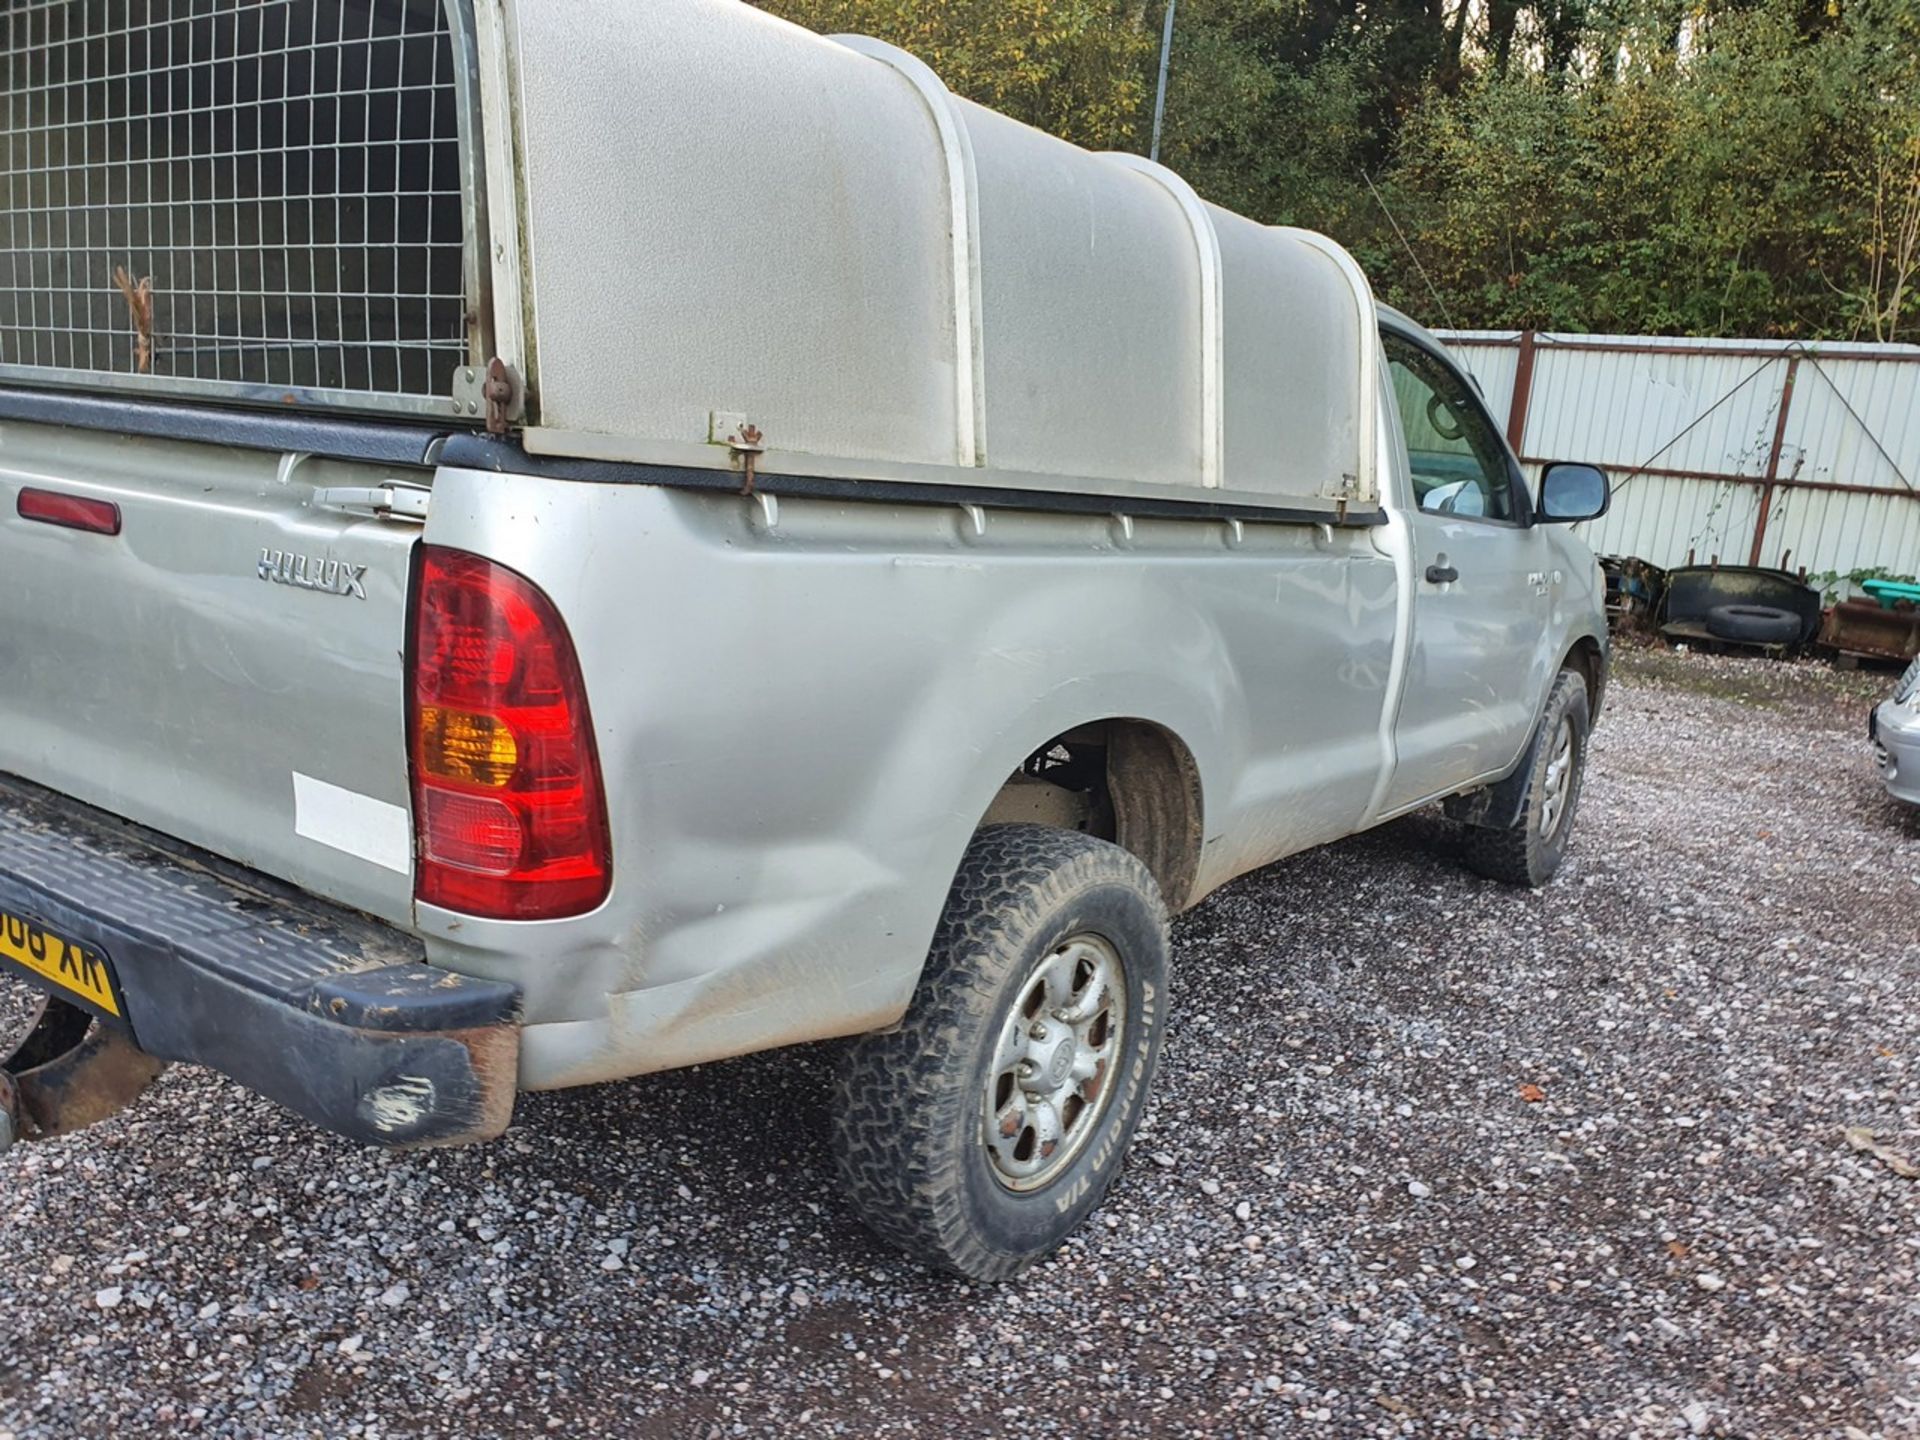 08/08 TOYOTA HILUX HL2 D-4D 4X4 S/C - 2494cc 2dr 4x4 (Silver, 78k) - Image 28 of 32